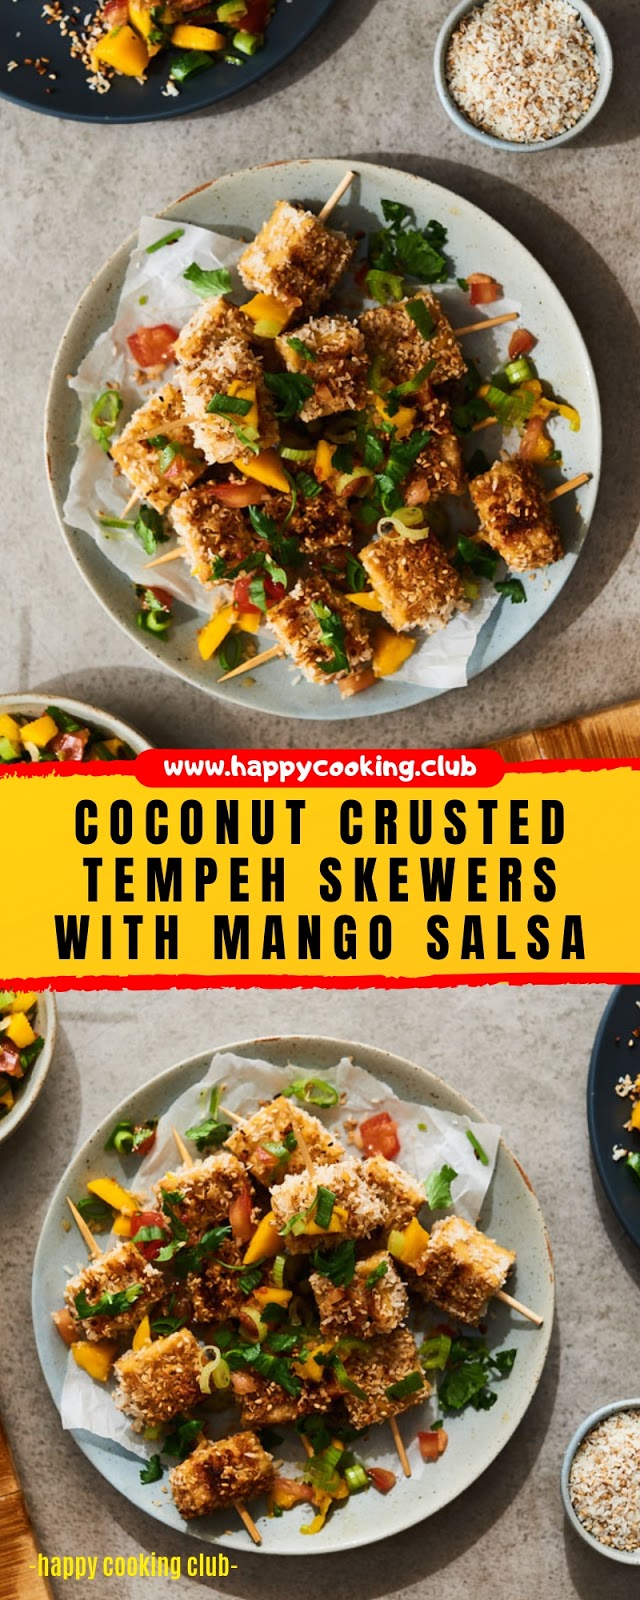 COCONUT CRUSTED TEMPEH SKEWERS WITH MANGO SALSA